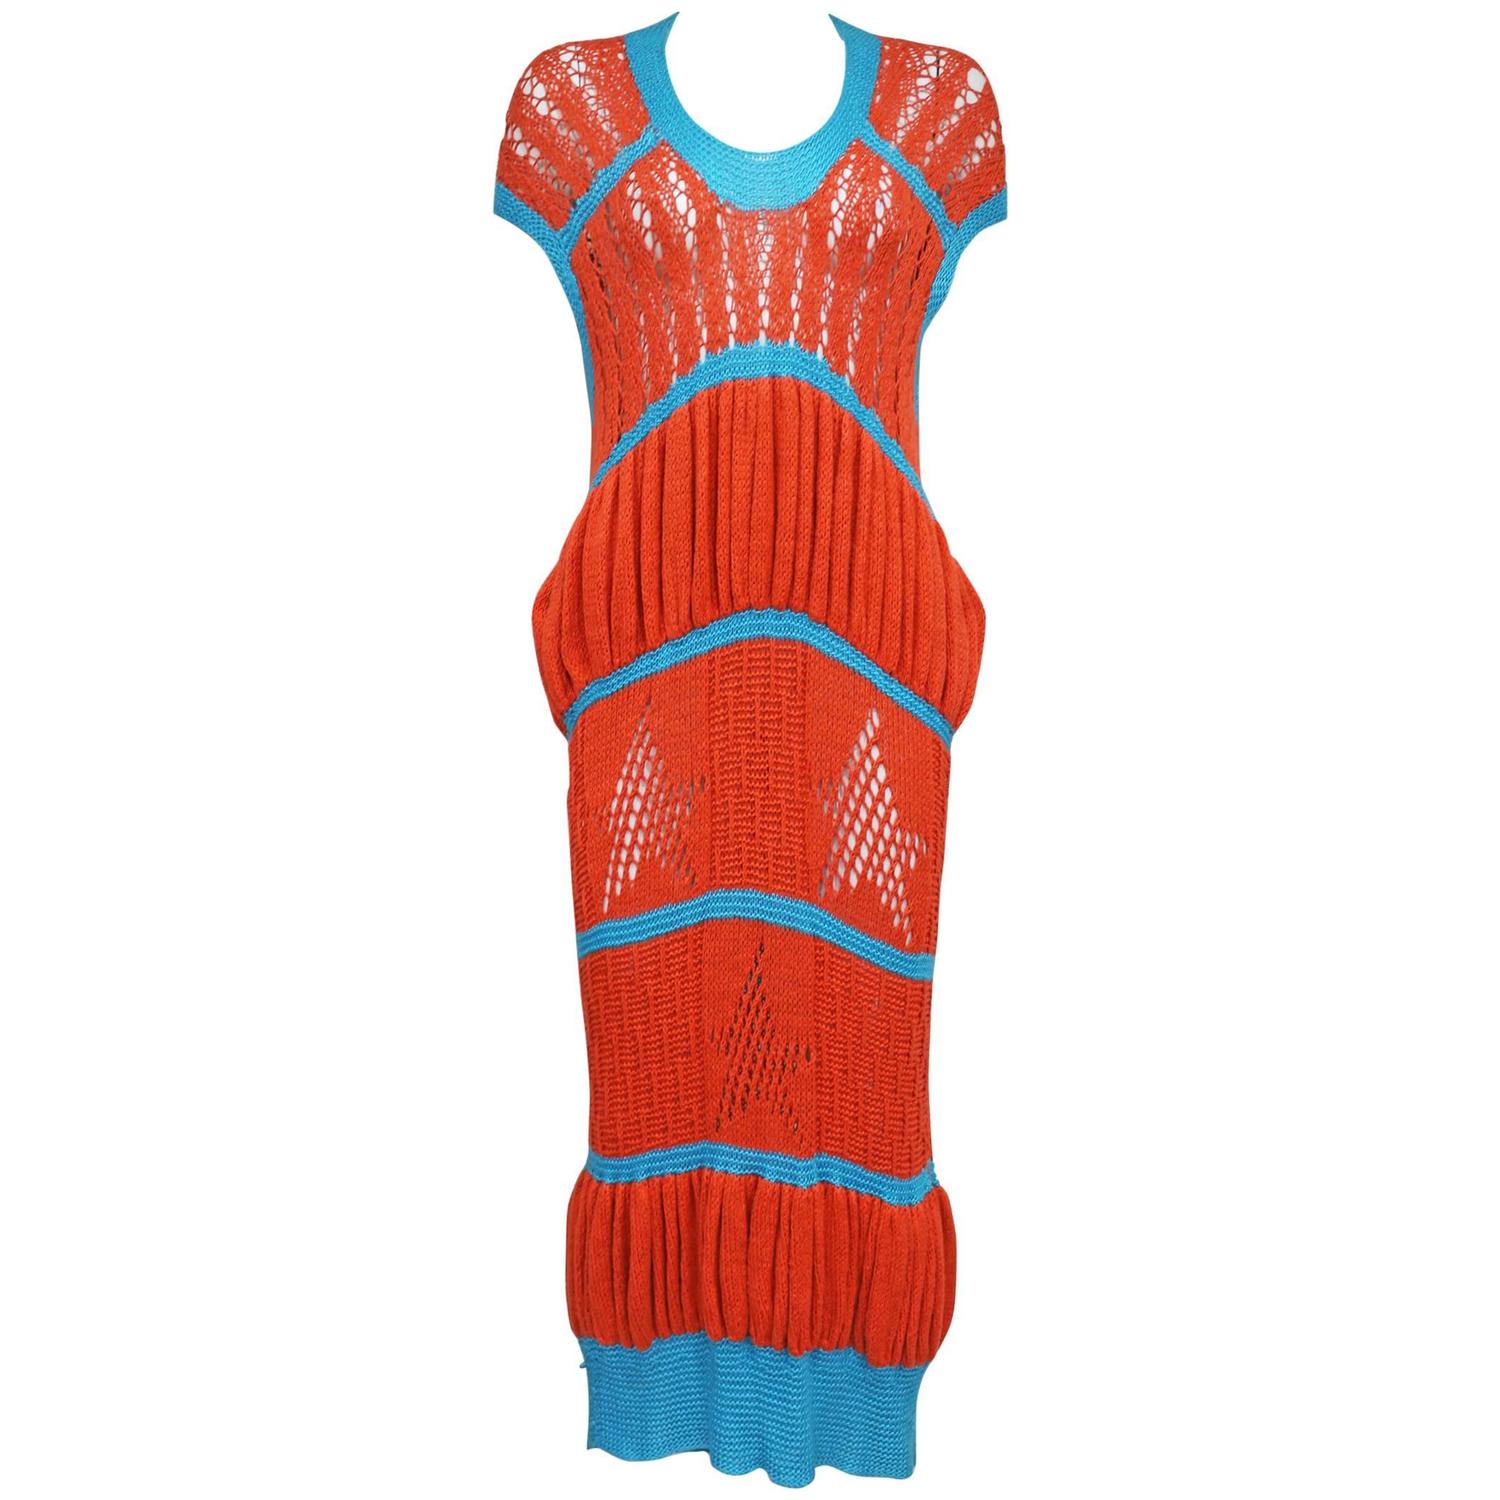 Body Map knitted tube dress, c. 1985 For Sale at 1stdibs